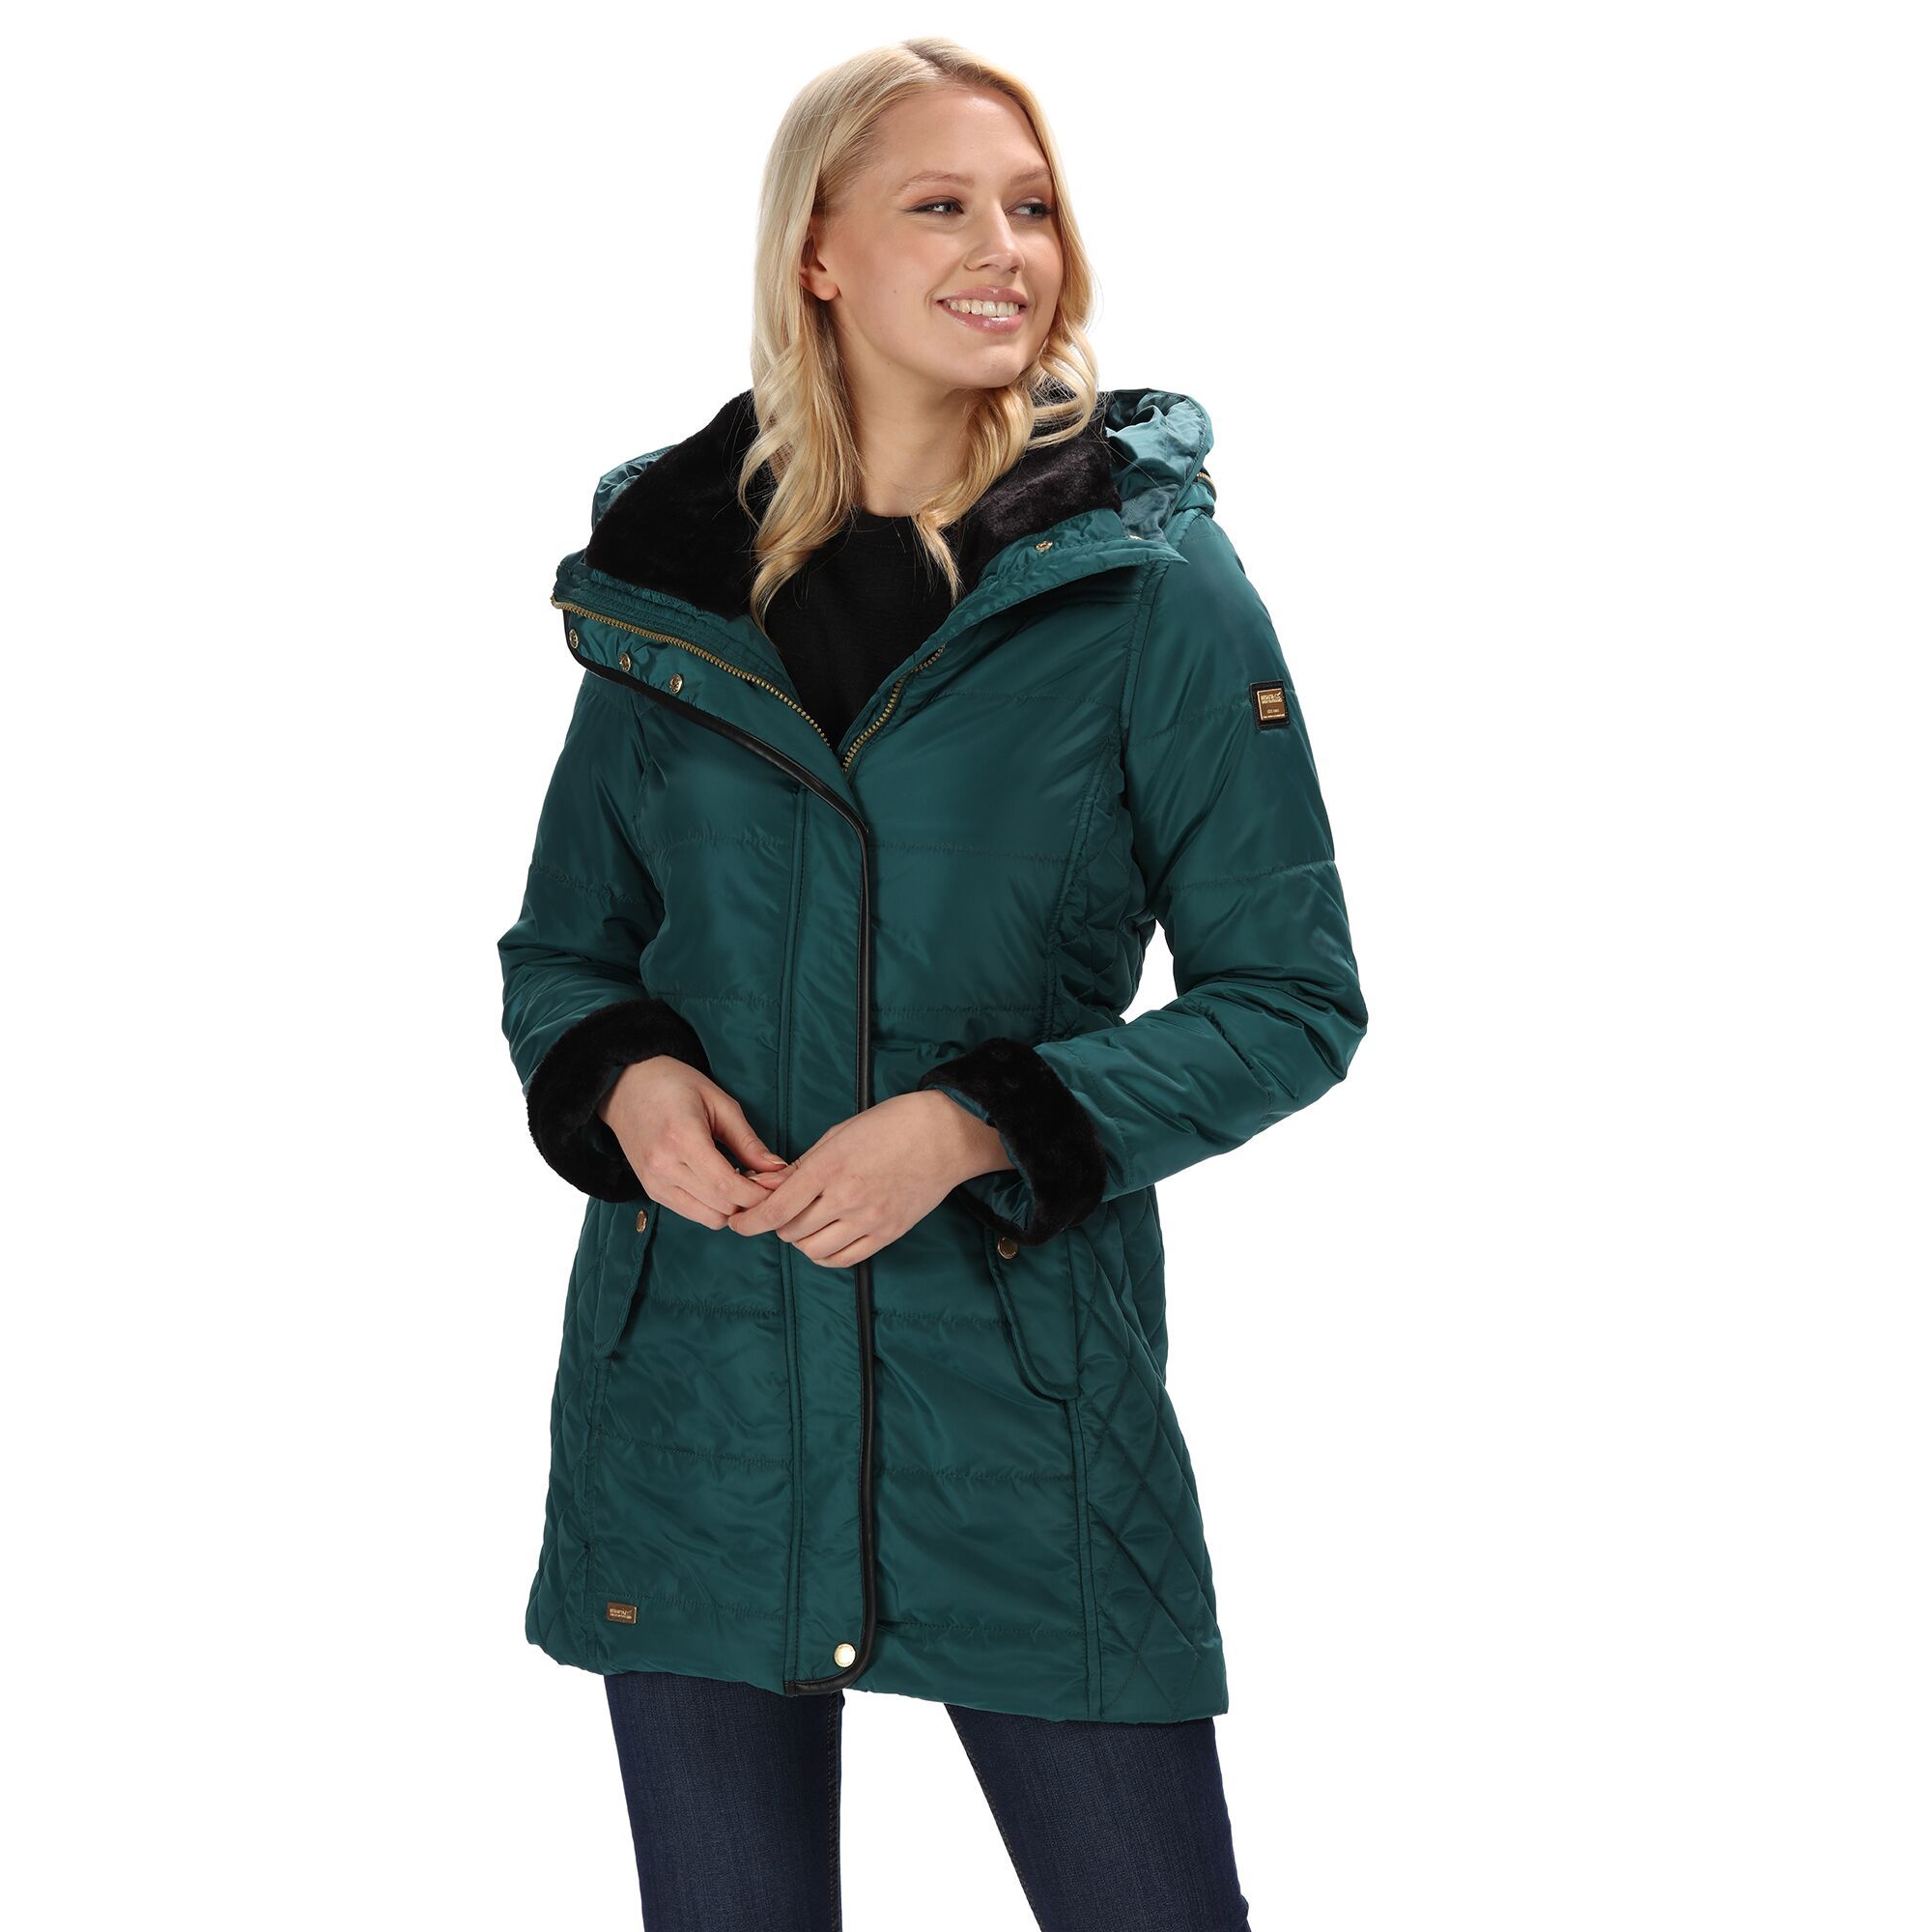 Material: 100% polyester. Long-line baffle jacket cut with a shapely silhouette. The outer uses high-shine, showerproof fabric while the inside is diamond quilted and baffle lined with Thermoguard insulation. With an expanding zip feature to the hood so you can wear it oversized. Features a lined collar and cuffs with soft faux-fur. With poppered pockets and the Regatta Outdoors badge on the left sleeve. Includes an internal security pocket and 2 lower pockets with flaps. Also features a 2 way centre front zip. Size (chest): (6 UK) 30in, (8 UK) 32in, (10 UK) 34in, (12 UK) 36in, (14 UK) 38in, (16 UK) 40in, (18 UK) 43in, (20 UK) 45in, (22 UK) 48in, (24 UK) 50in, (28 UK) 54in, (30 UK) 56in, (32 UK) 58in, (34 UK) 60in, (36 UK) 62in.